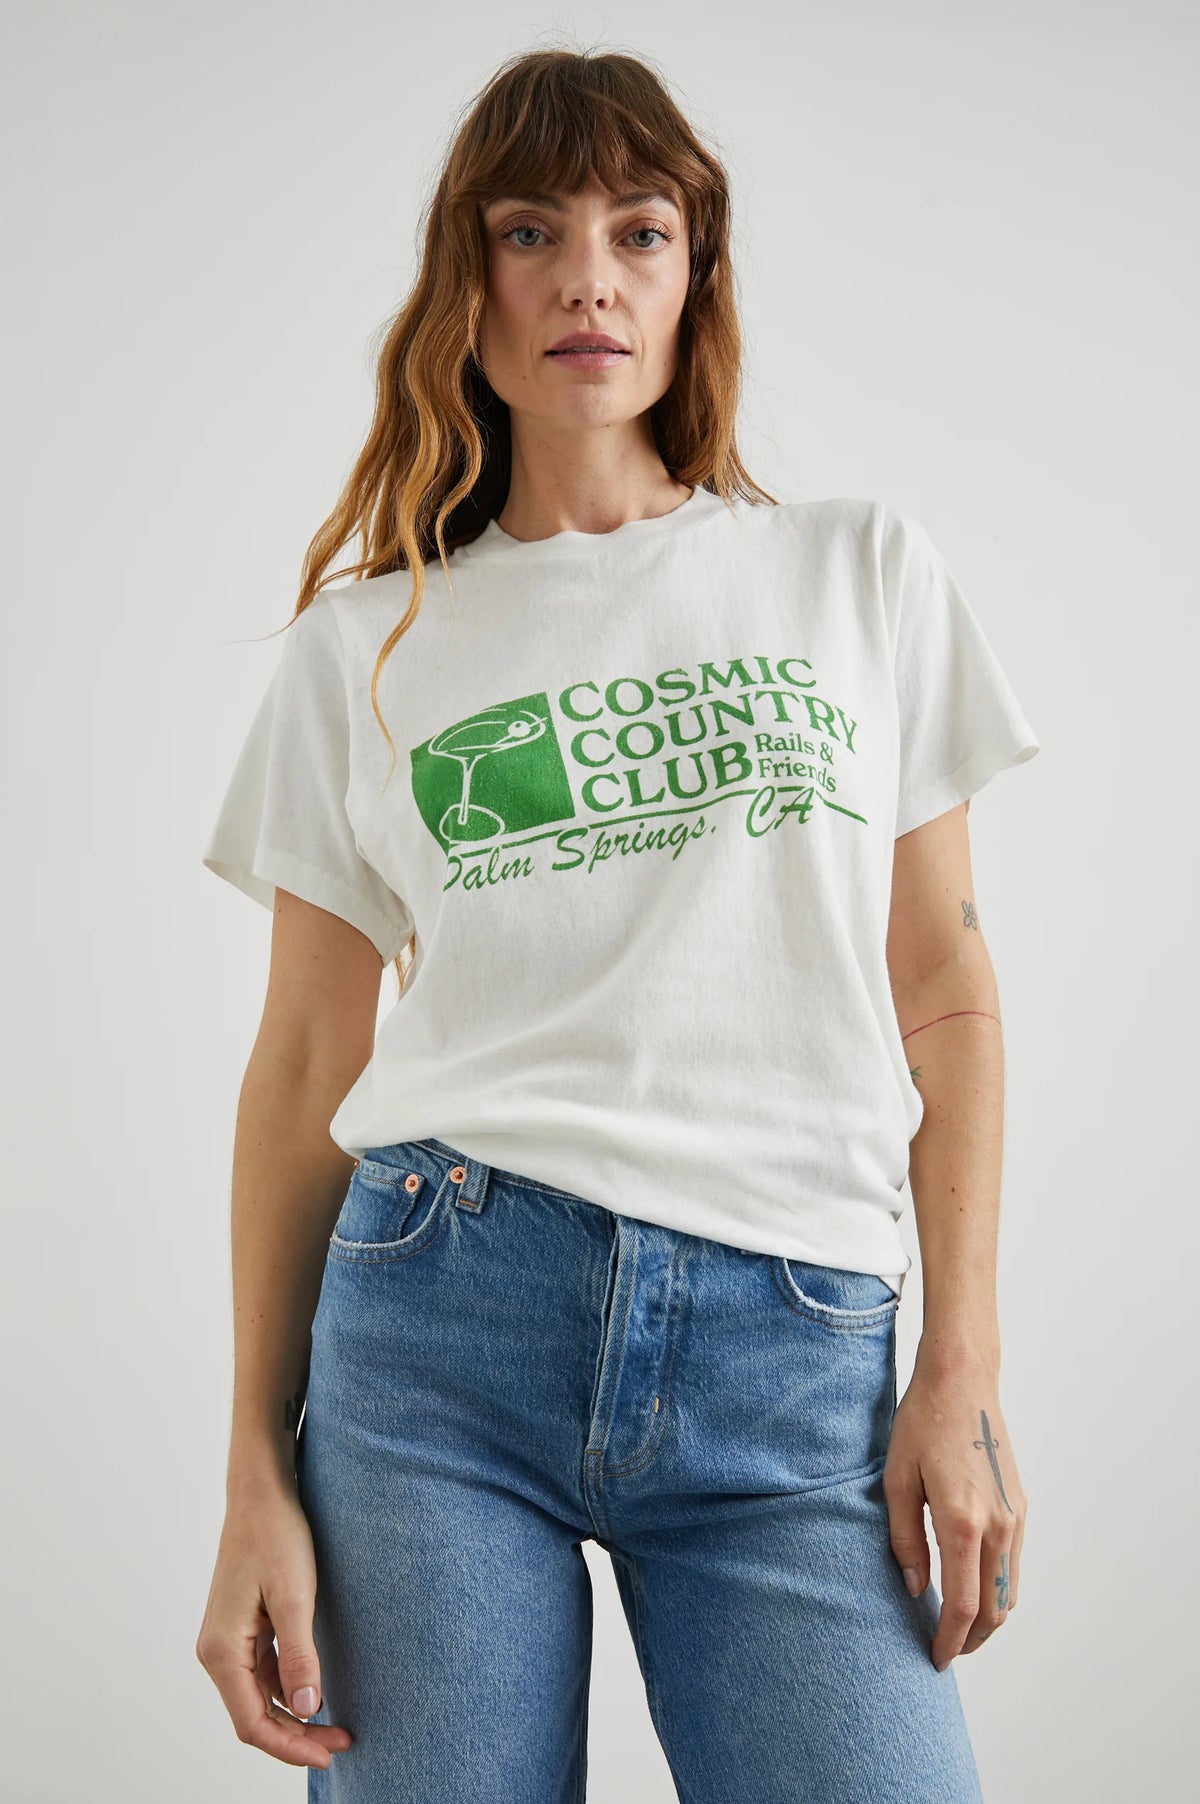 Ecru tee with cosmic country club logo on front